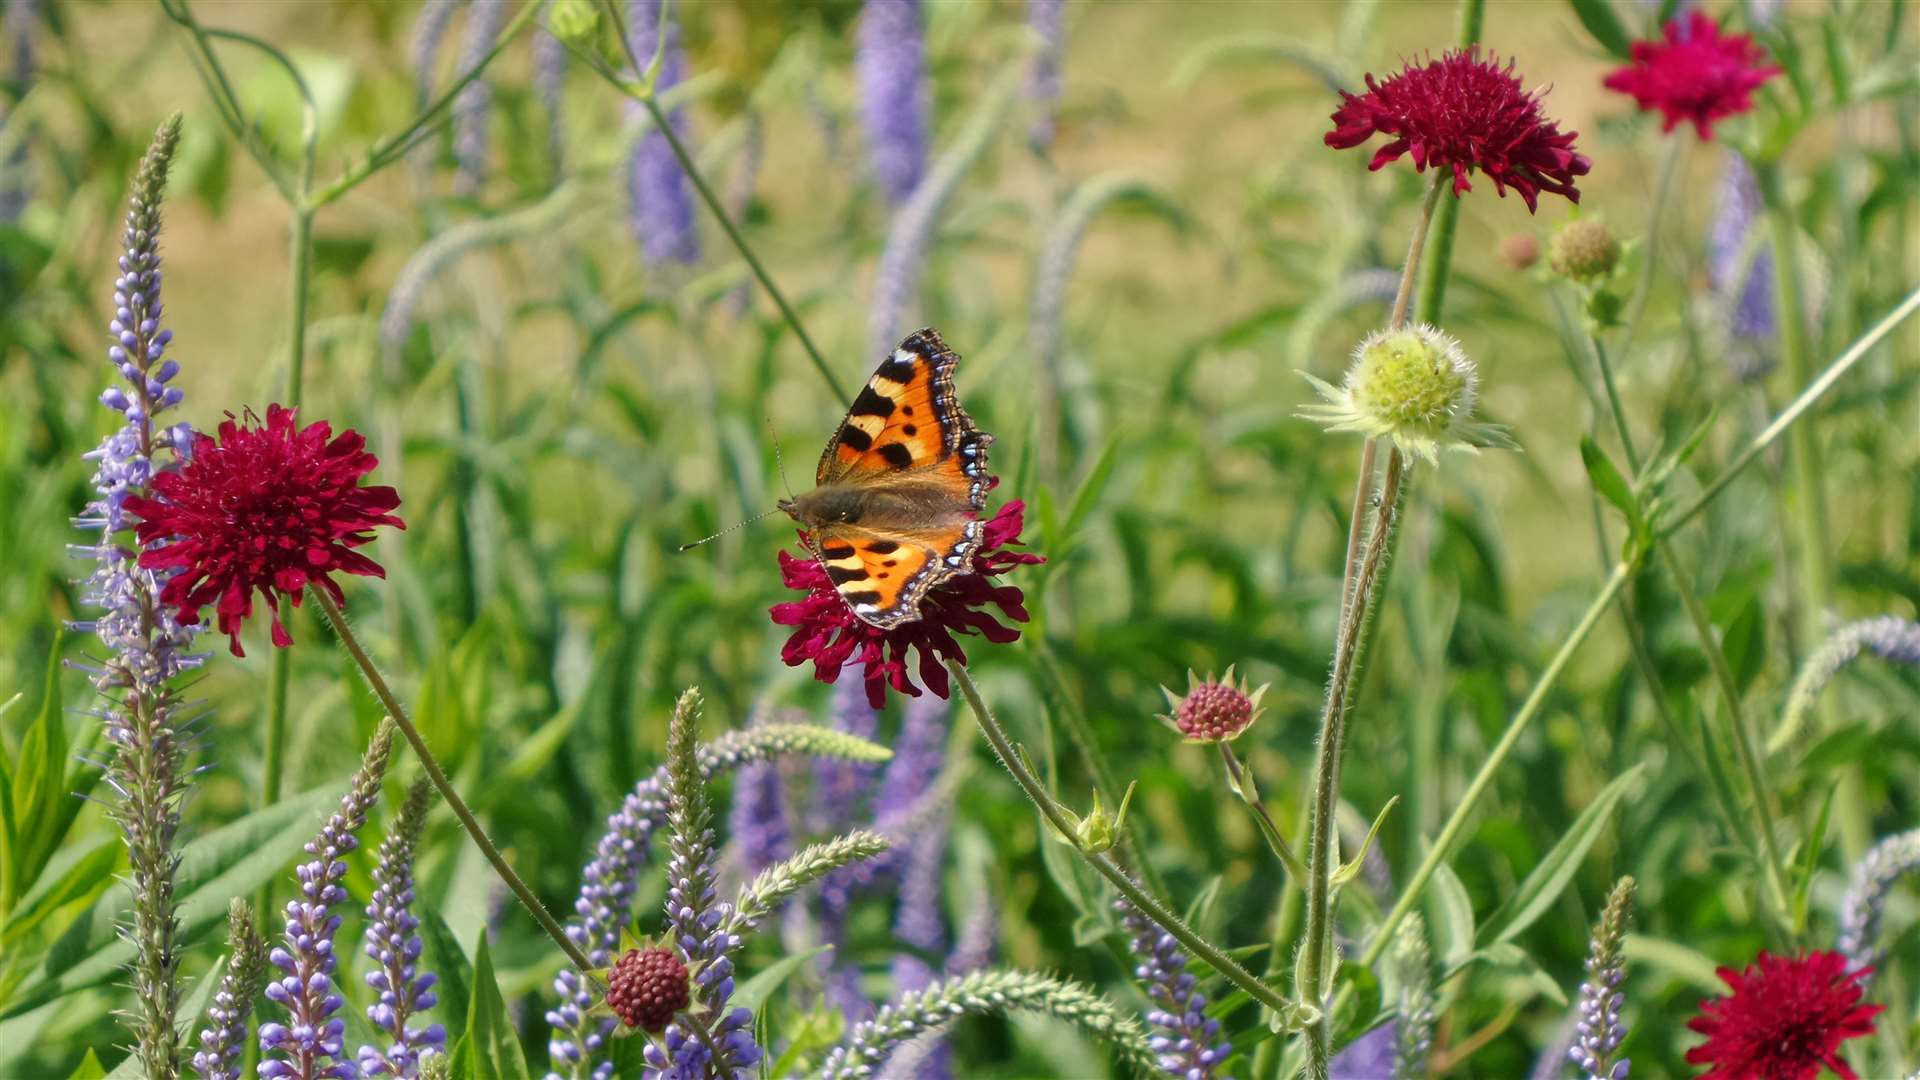 There are ways to encourage more butterflies to visit your garden